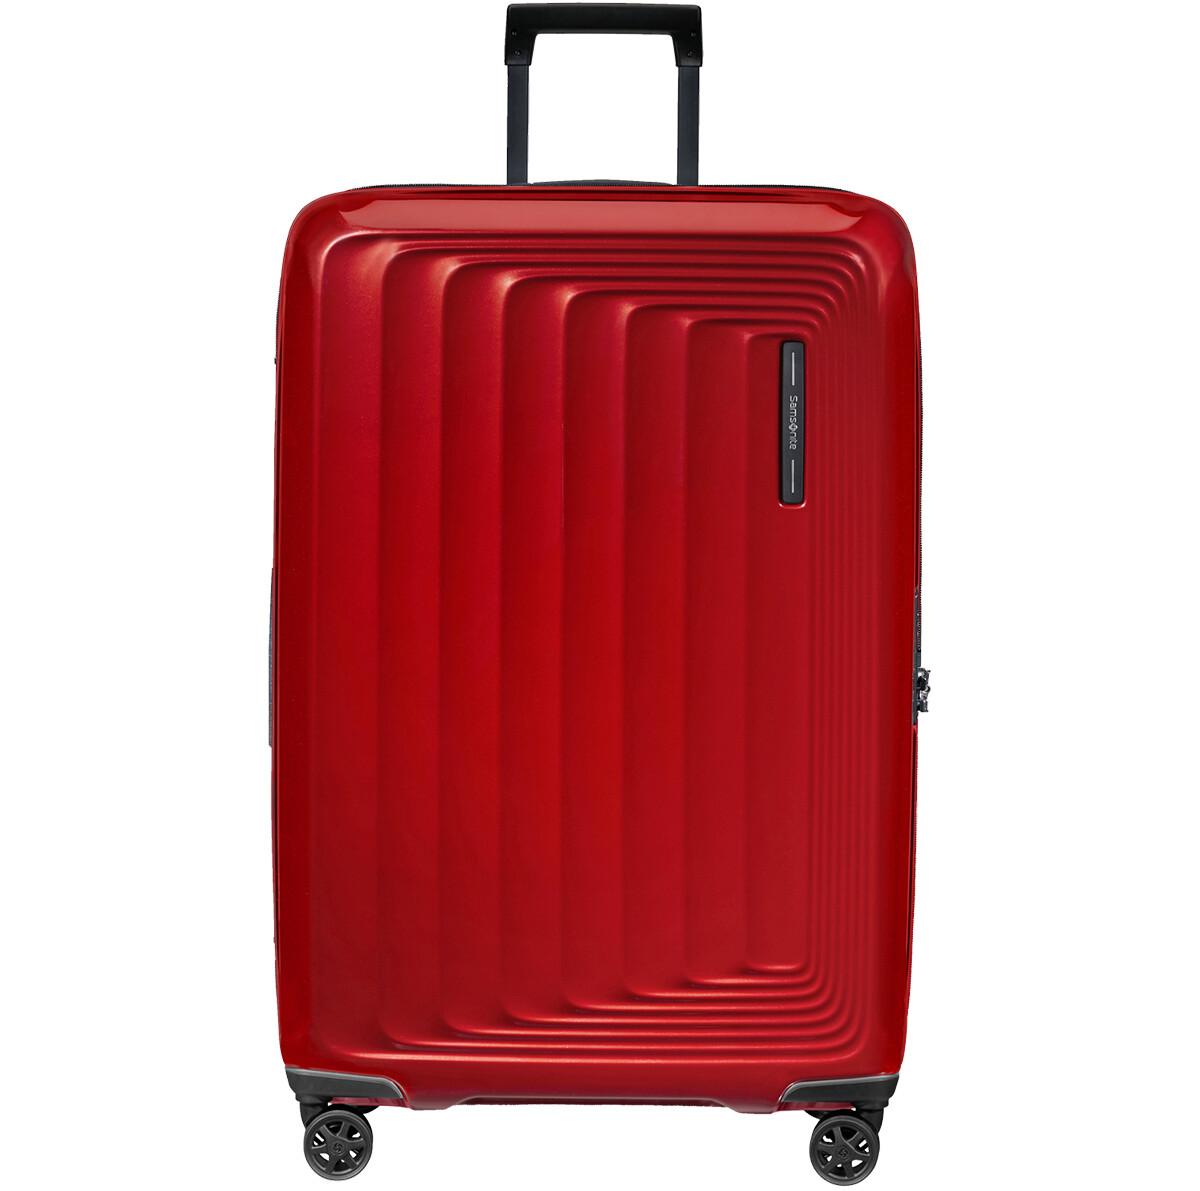 SAMSONITE Red Carry-On at